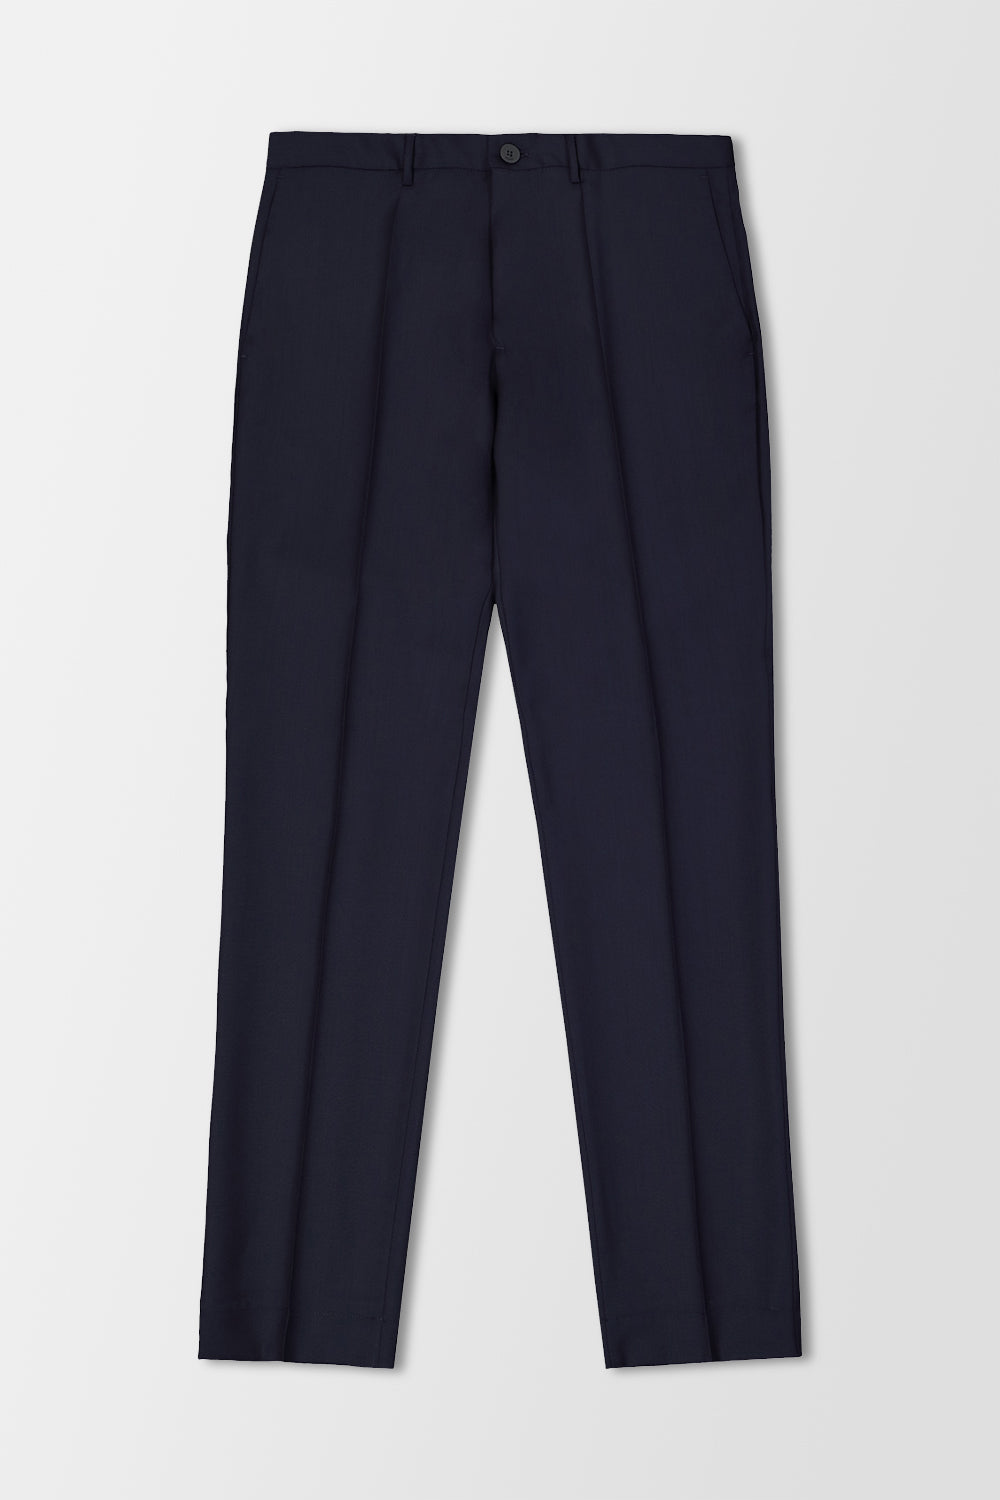 Incotex Navy Classic Trousers